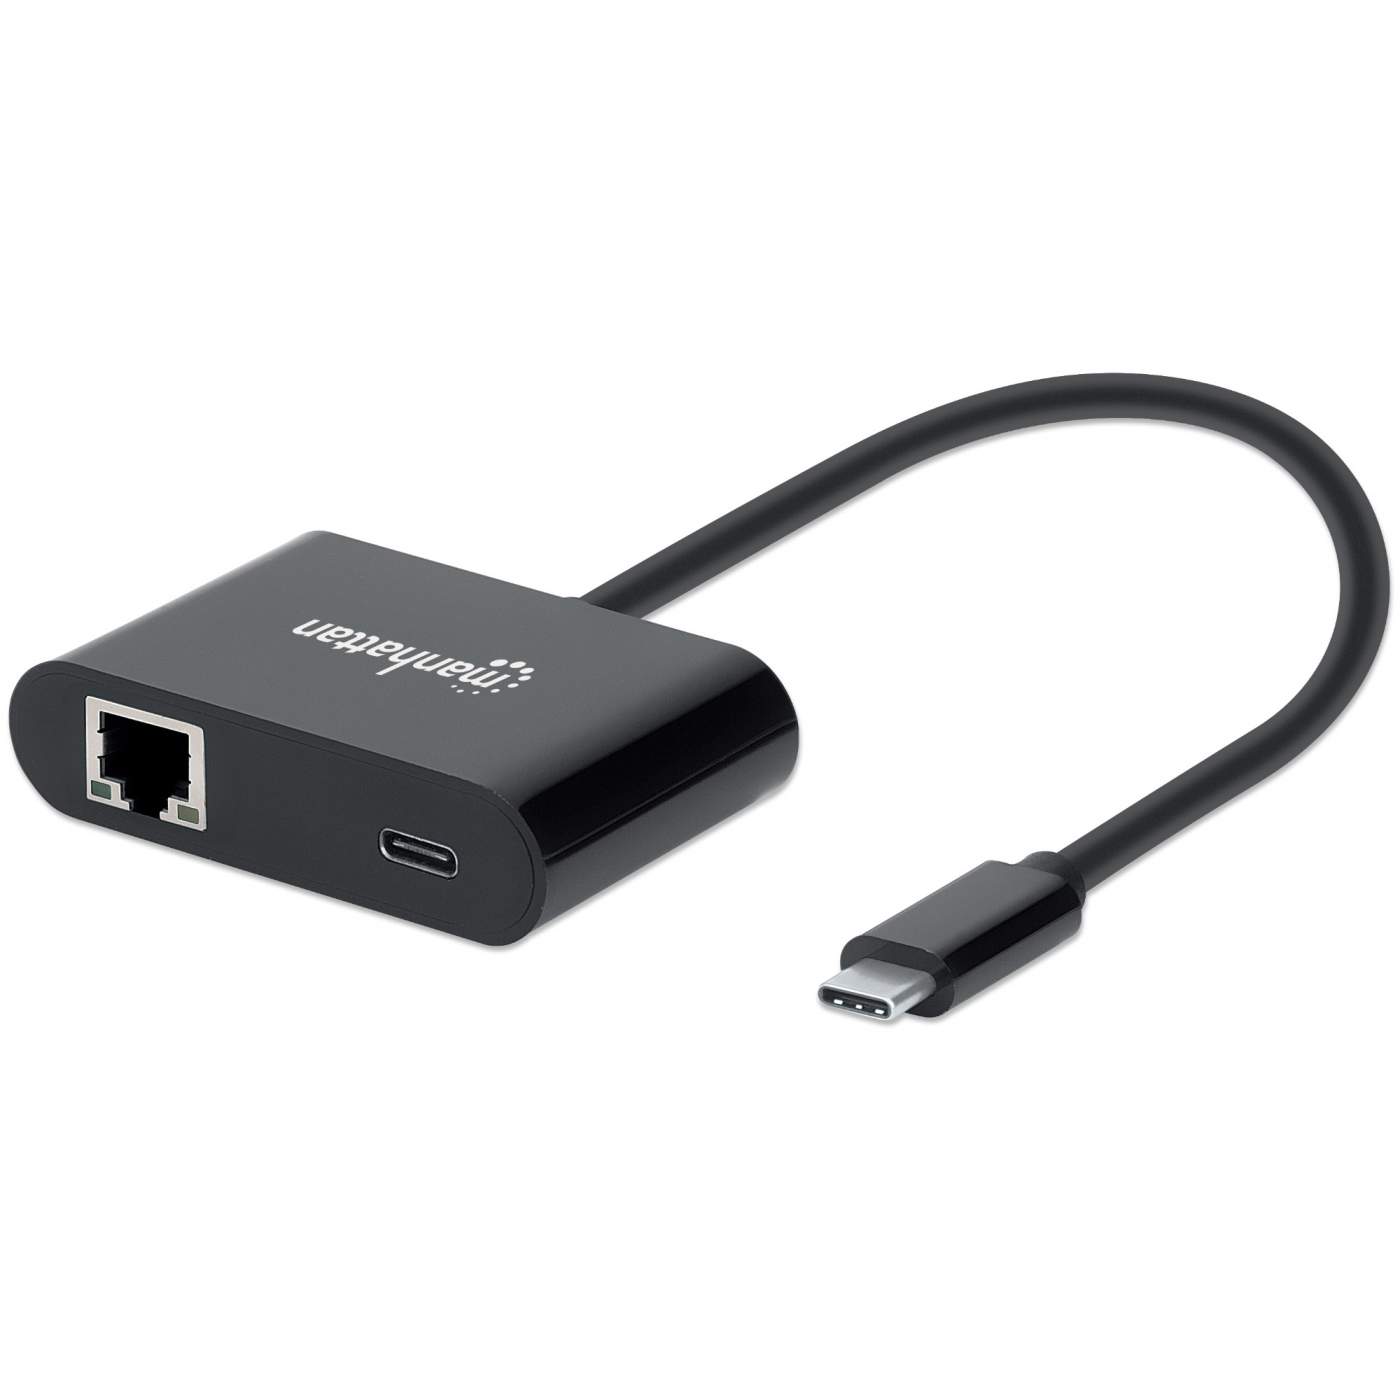 Uheldig omvendt Jet USB-C to GbE Network Adapter w/ Power Delivery Port